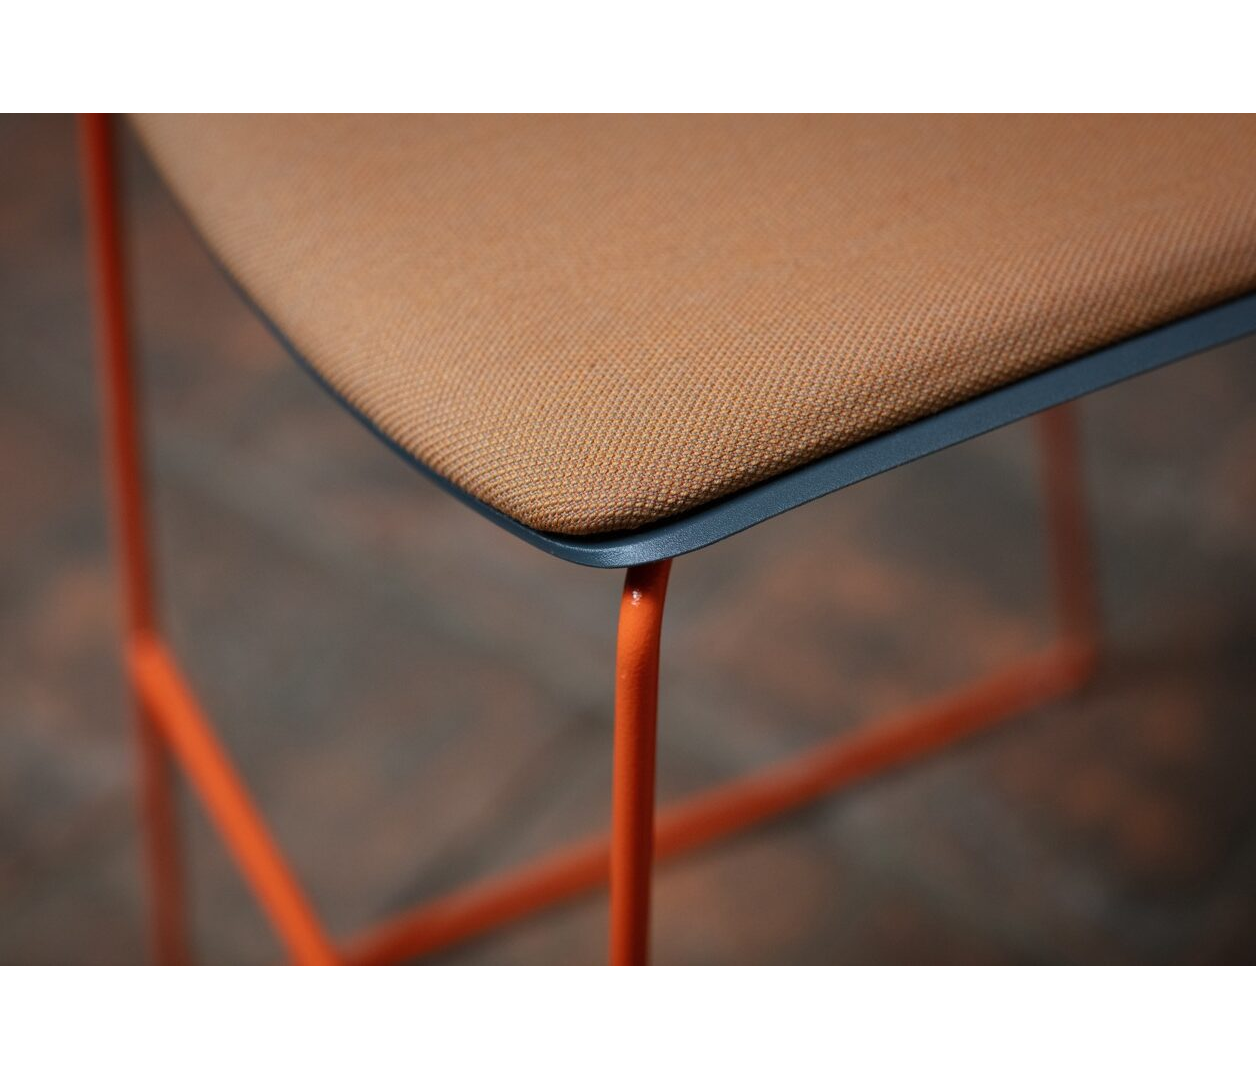 OCEE&FOUR – Chairs – FourSure 105 – Details Image 4 Large 2